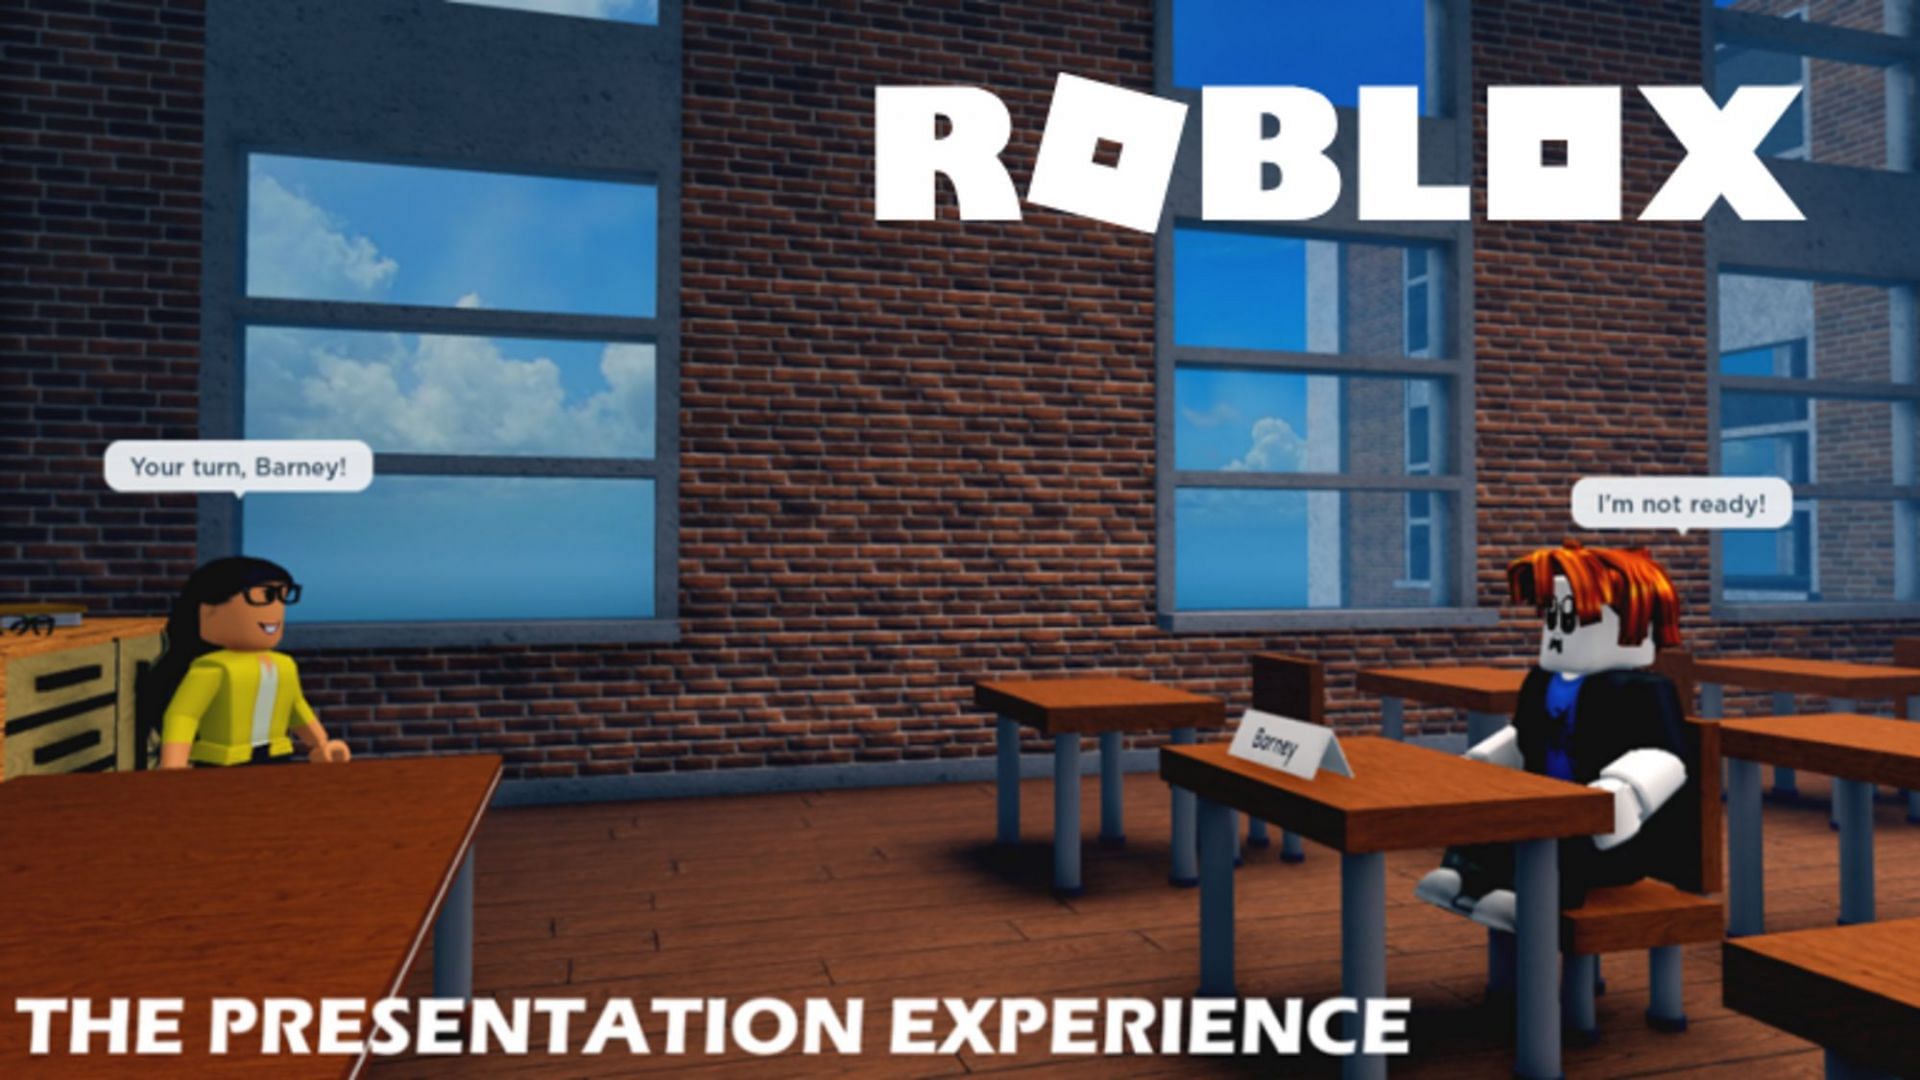 Roblox The Presentation Experience codes to earn more points (image via YouTube)